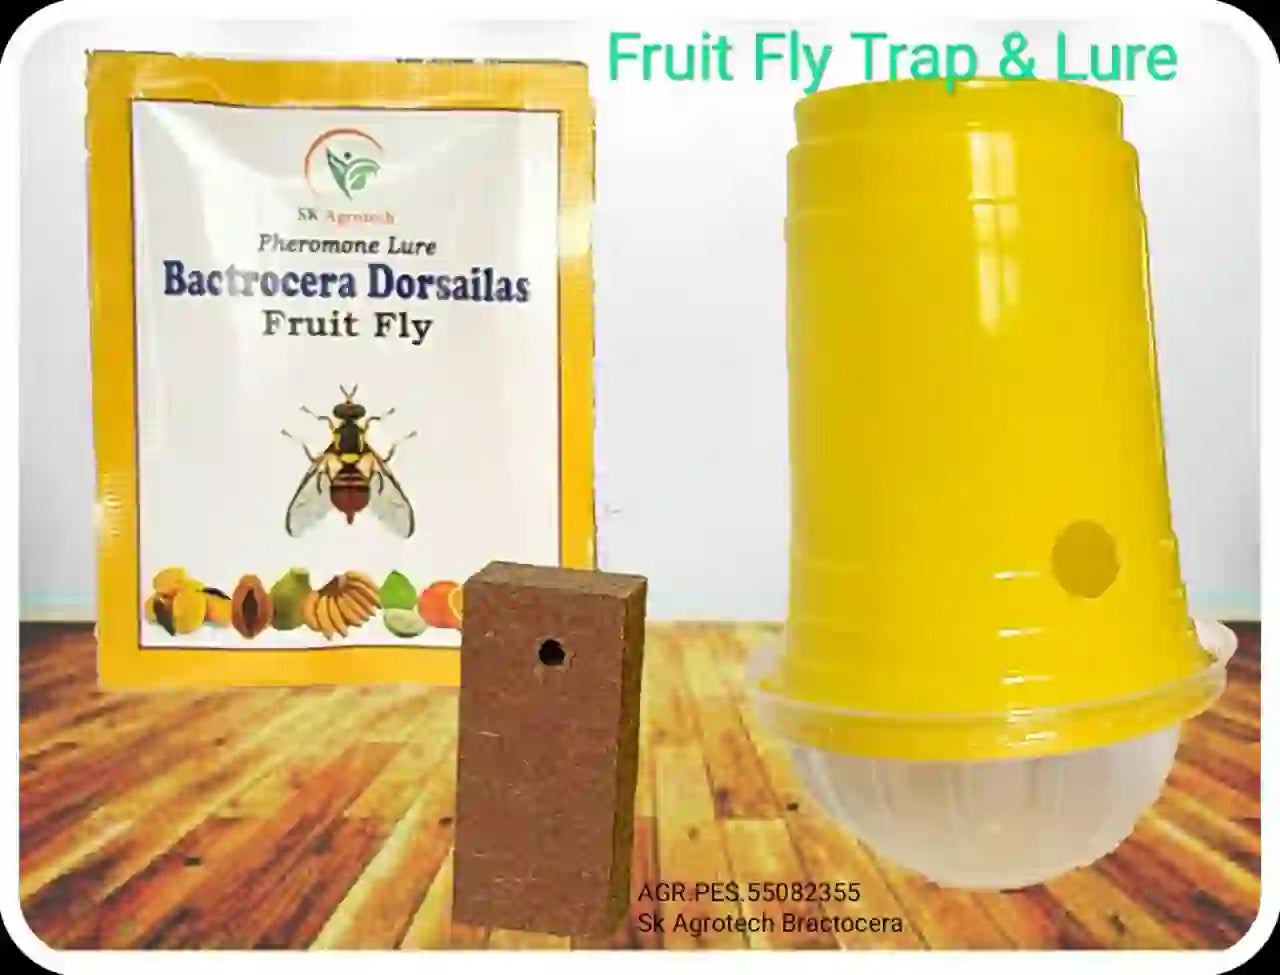 SK Agrotech Pheromone Eco Trap with Fruit Fly Lure - Krushidukan_1